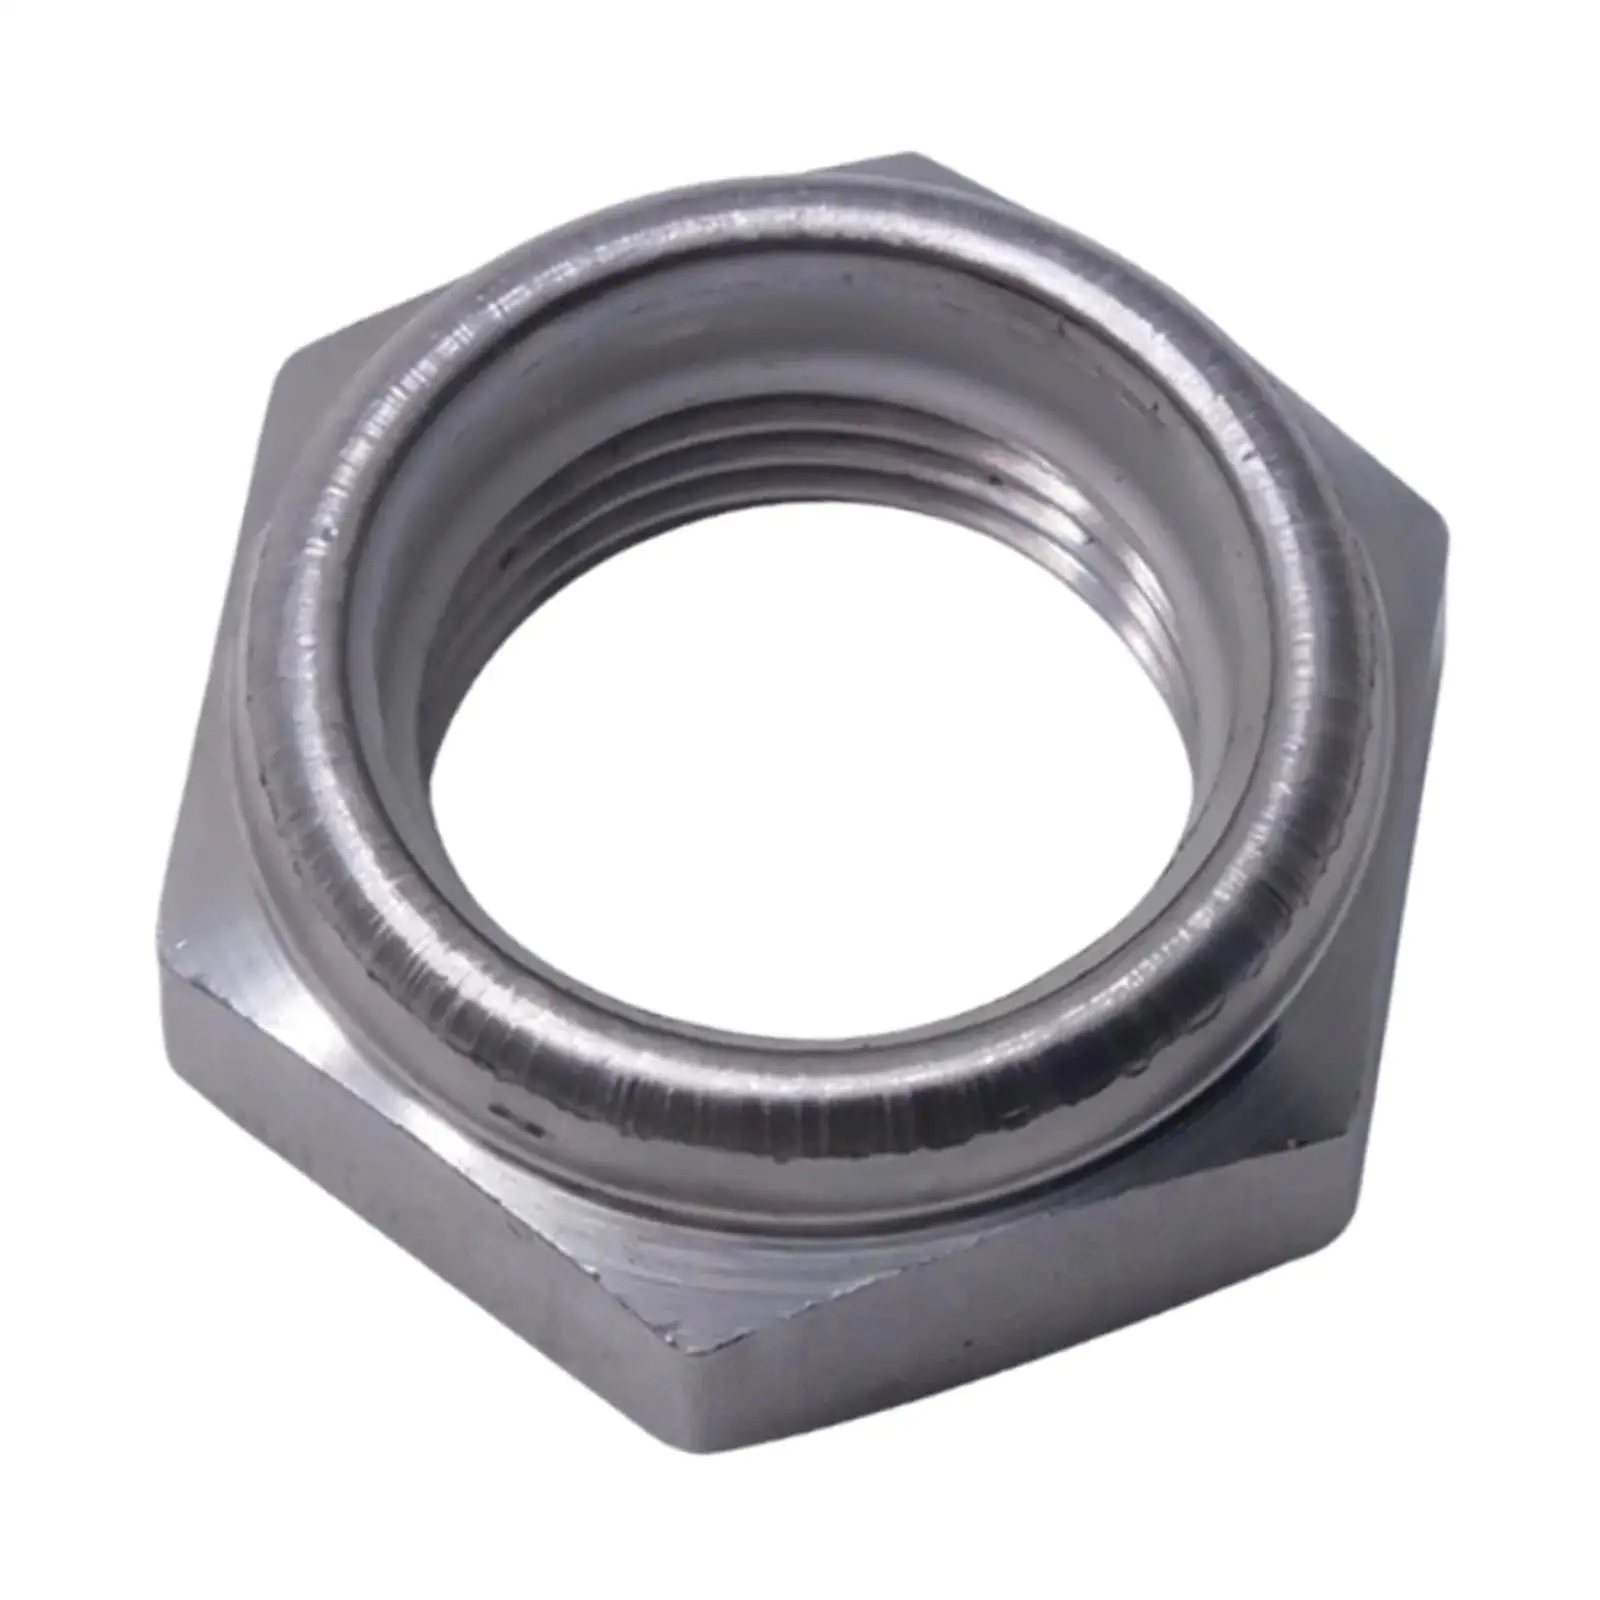 Self Locking Nut 90185-22043-00 Sturdy for Seapro Vehicle Repair Parts